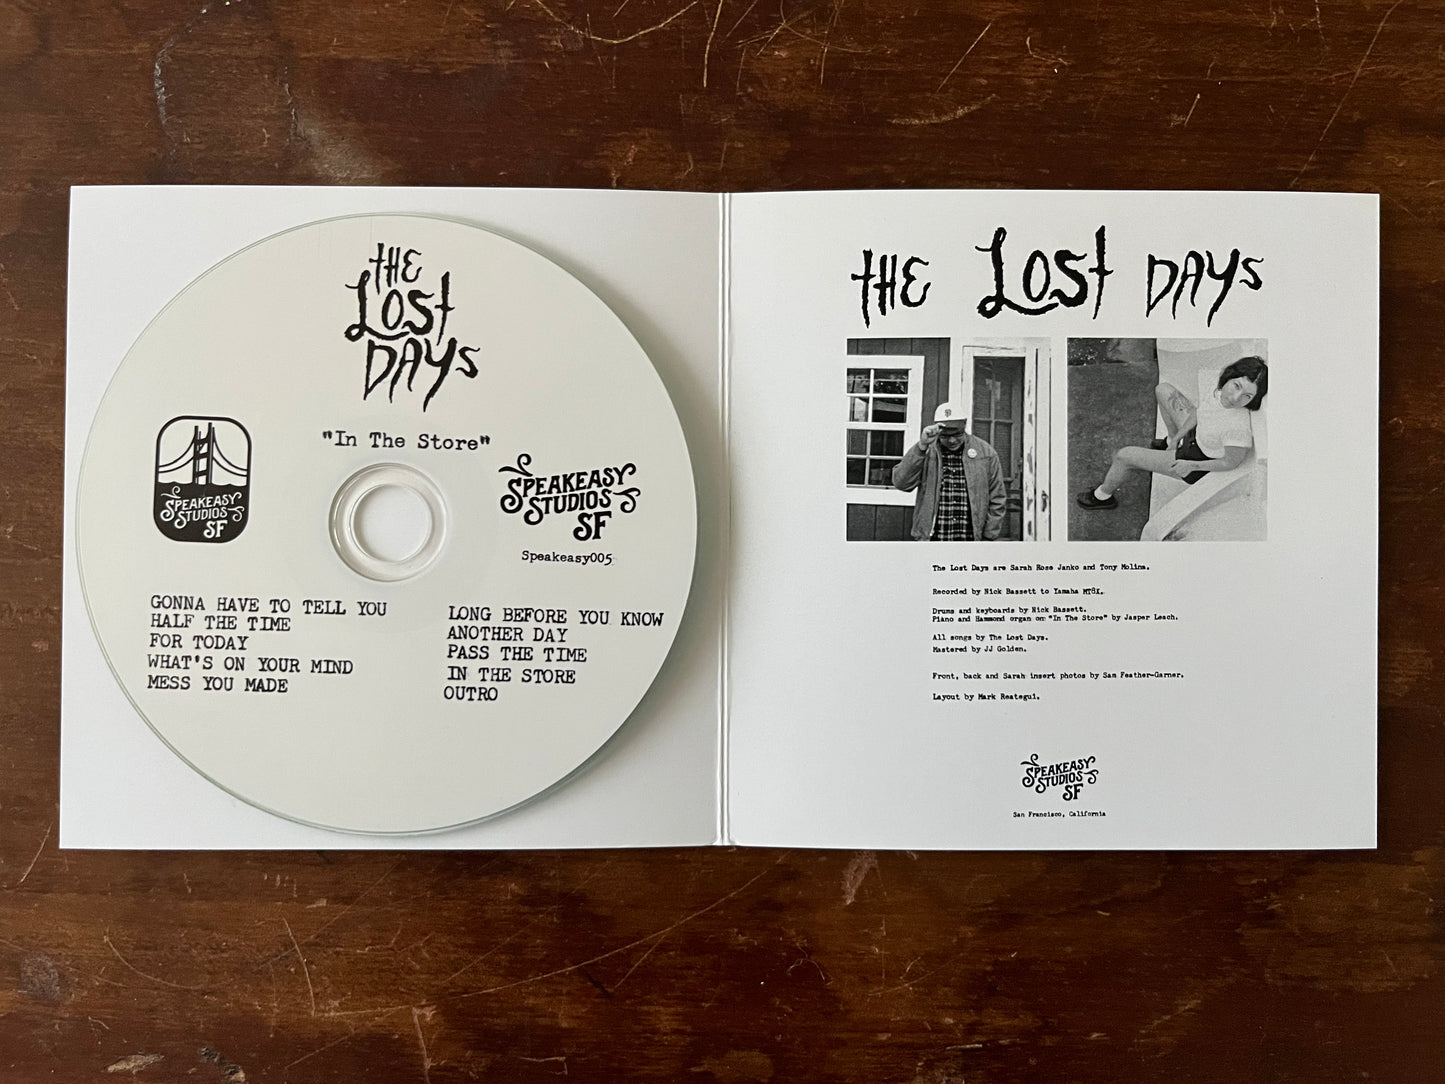 "In The Store" by The Lost Days - Compact Disc